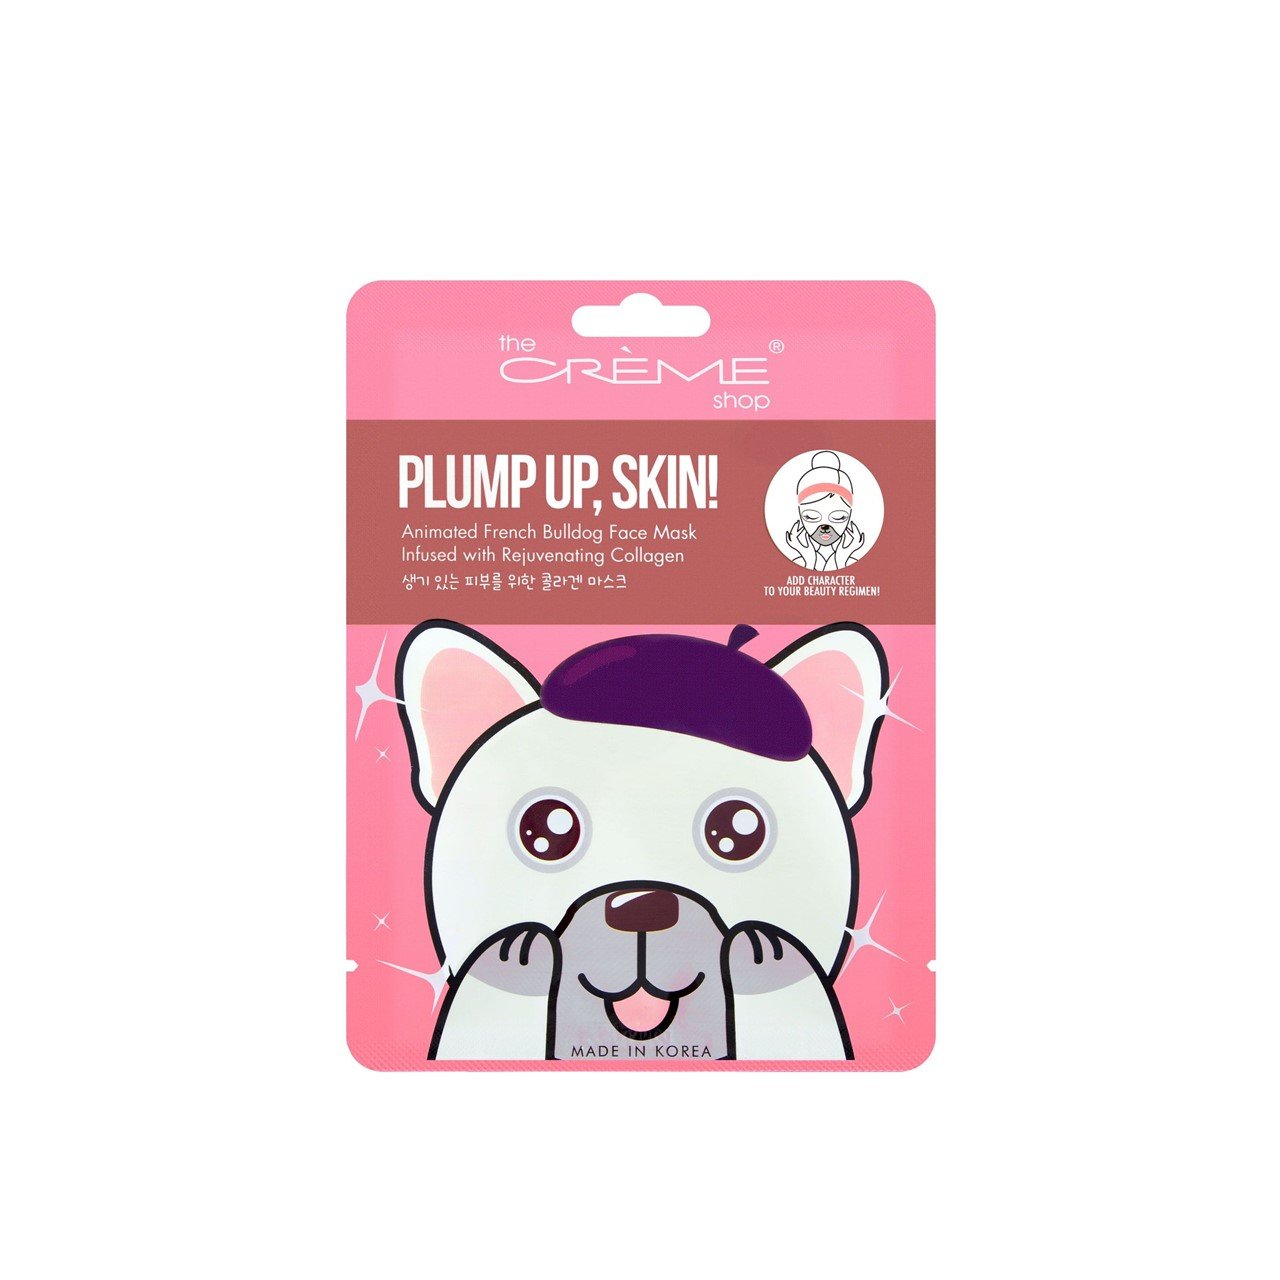 The Crème Shop Plump Up, Skin! Animated French Bulldog Face Mask 25g